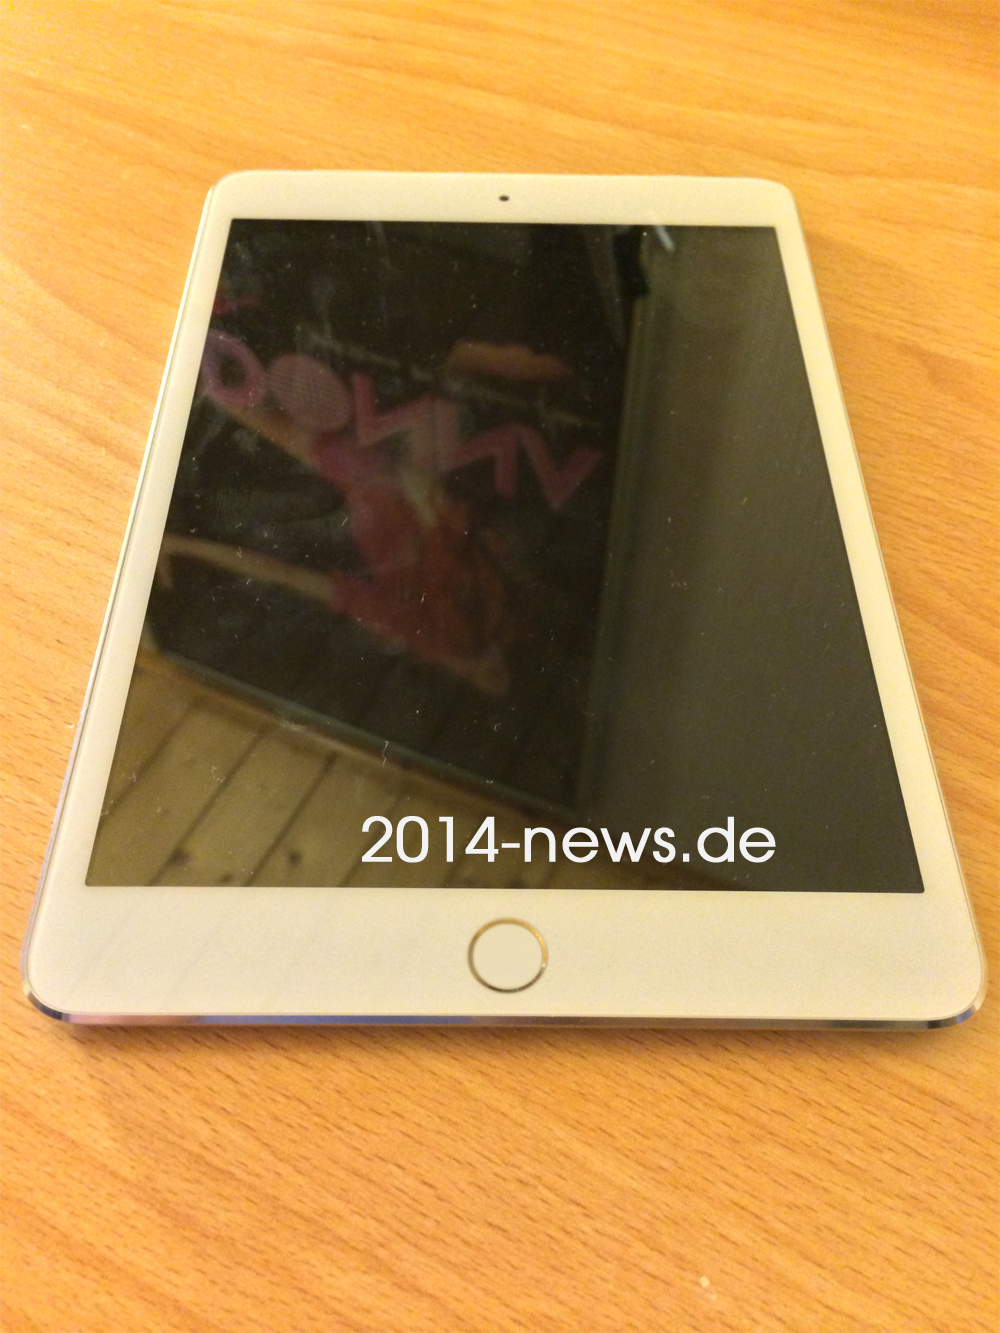 New Apple iPad mini 2 image puts Touch ID back on the table (again)